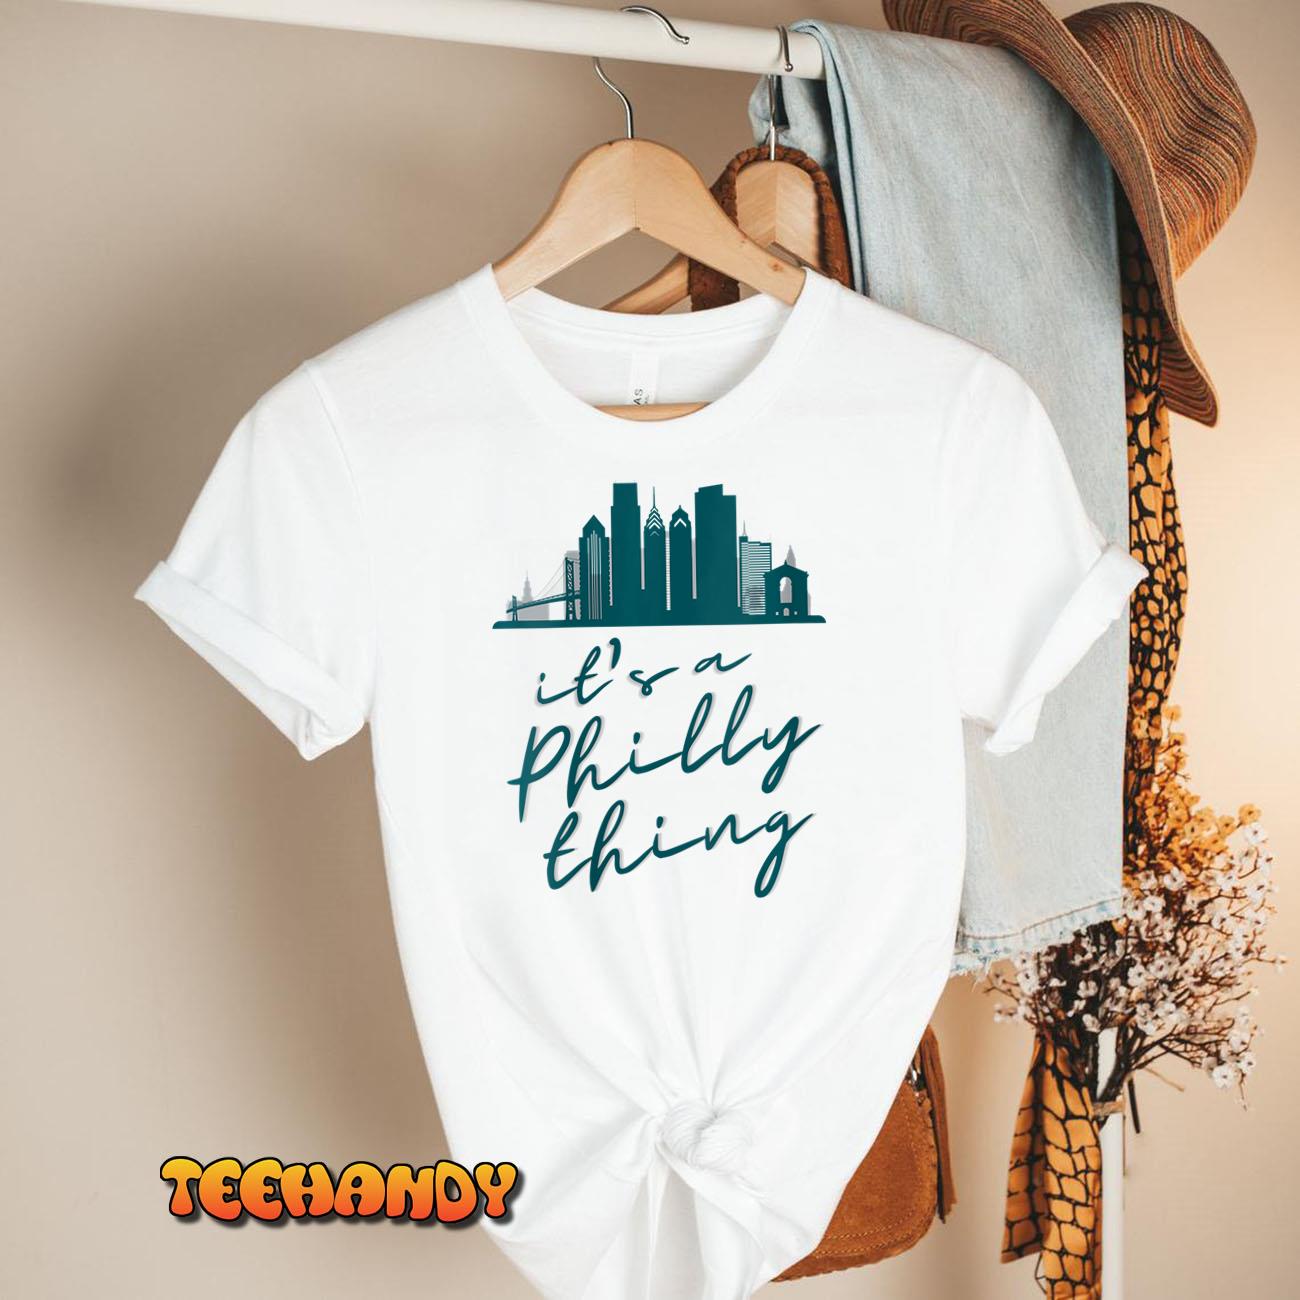 it's a philly thing t shirts